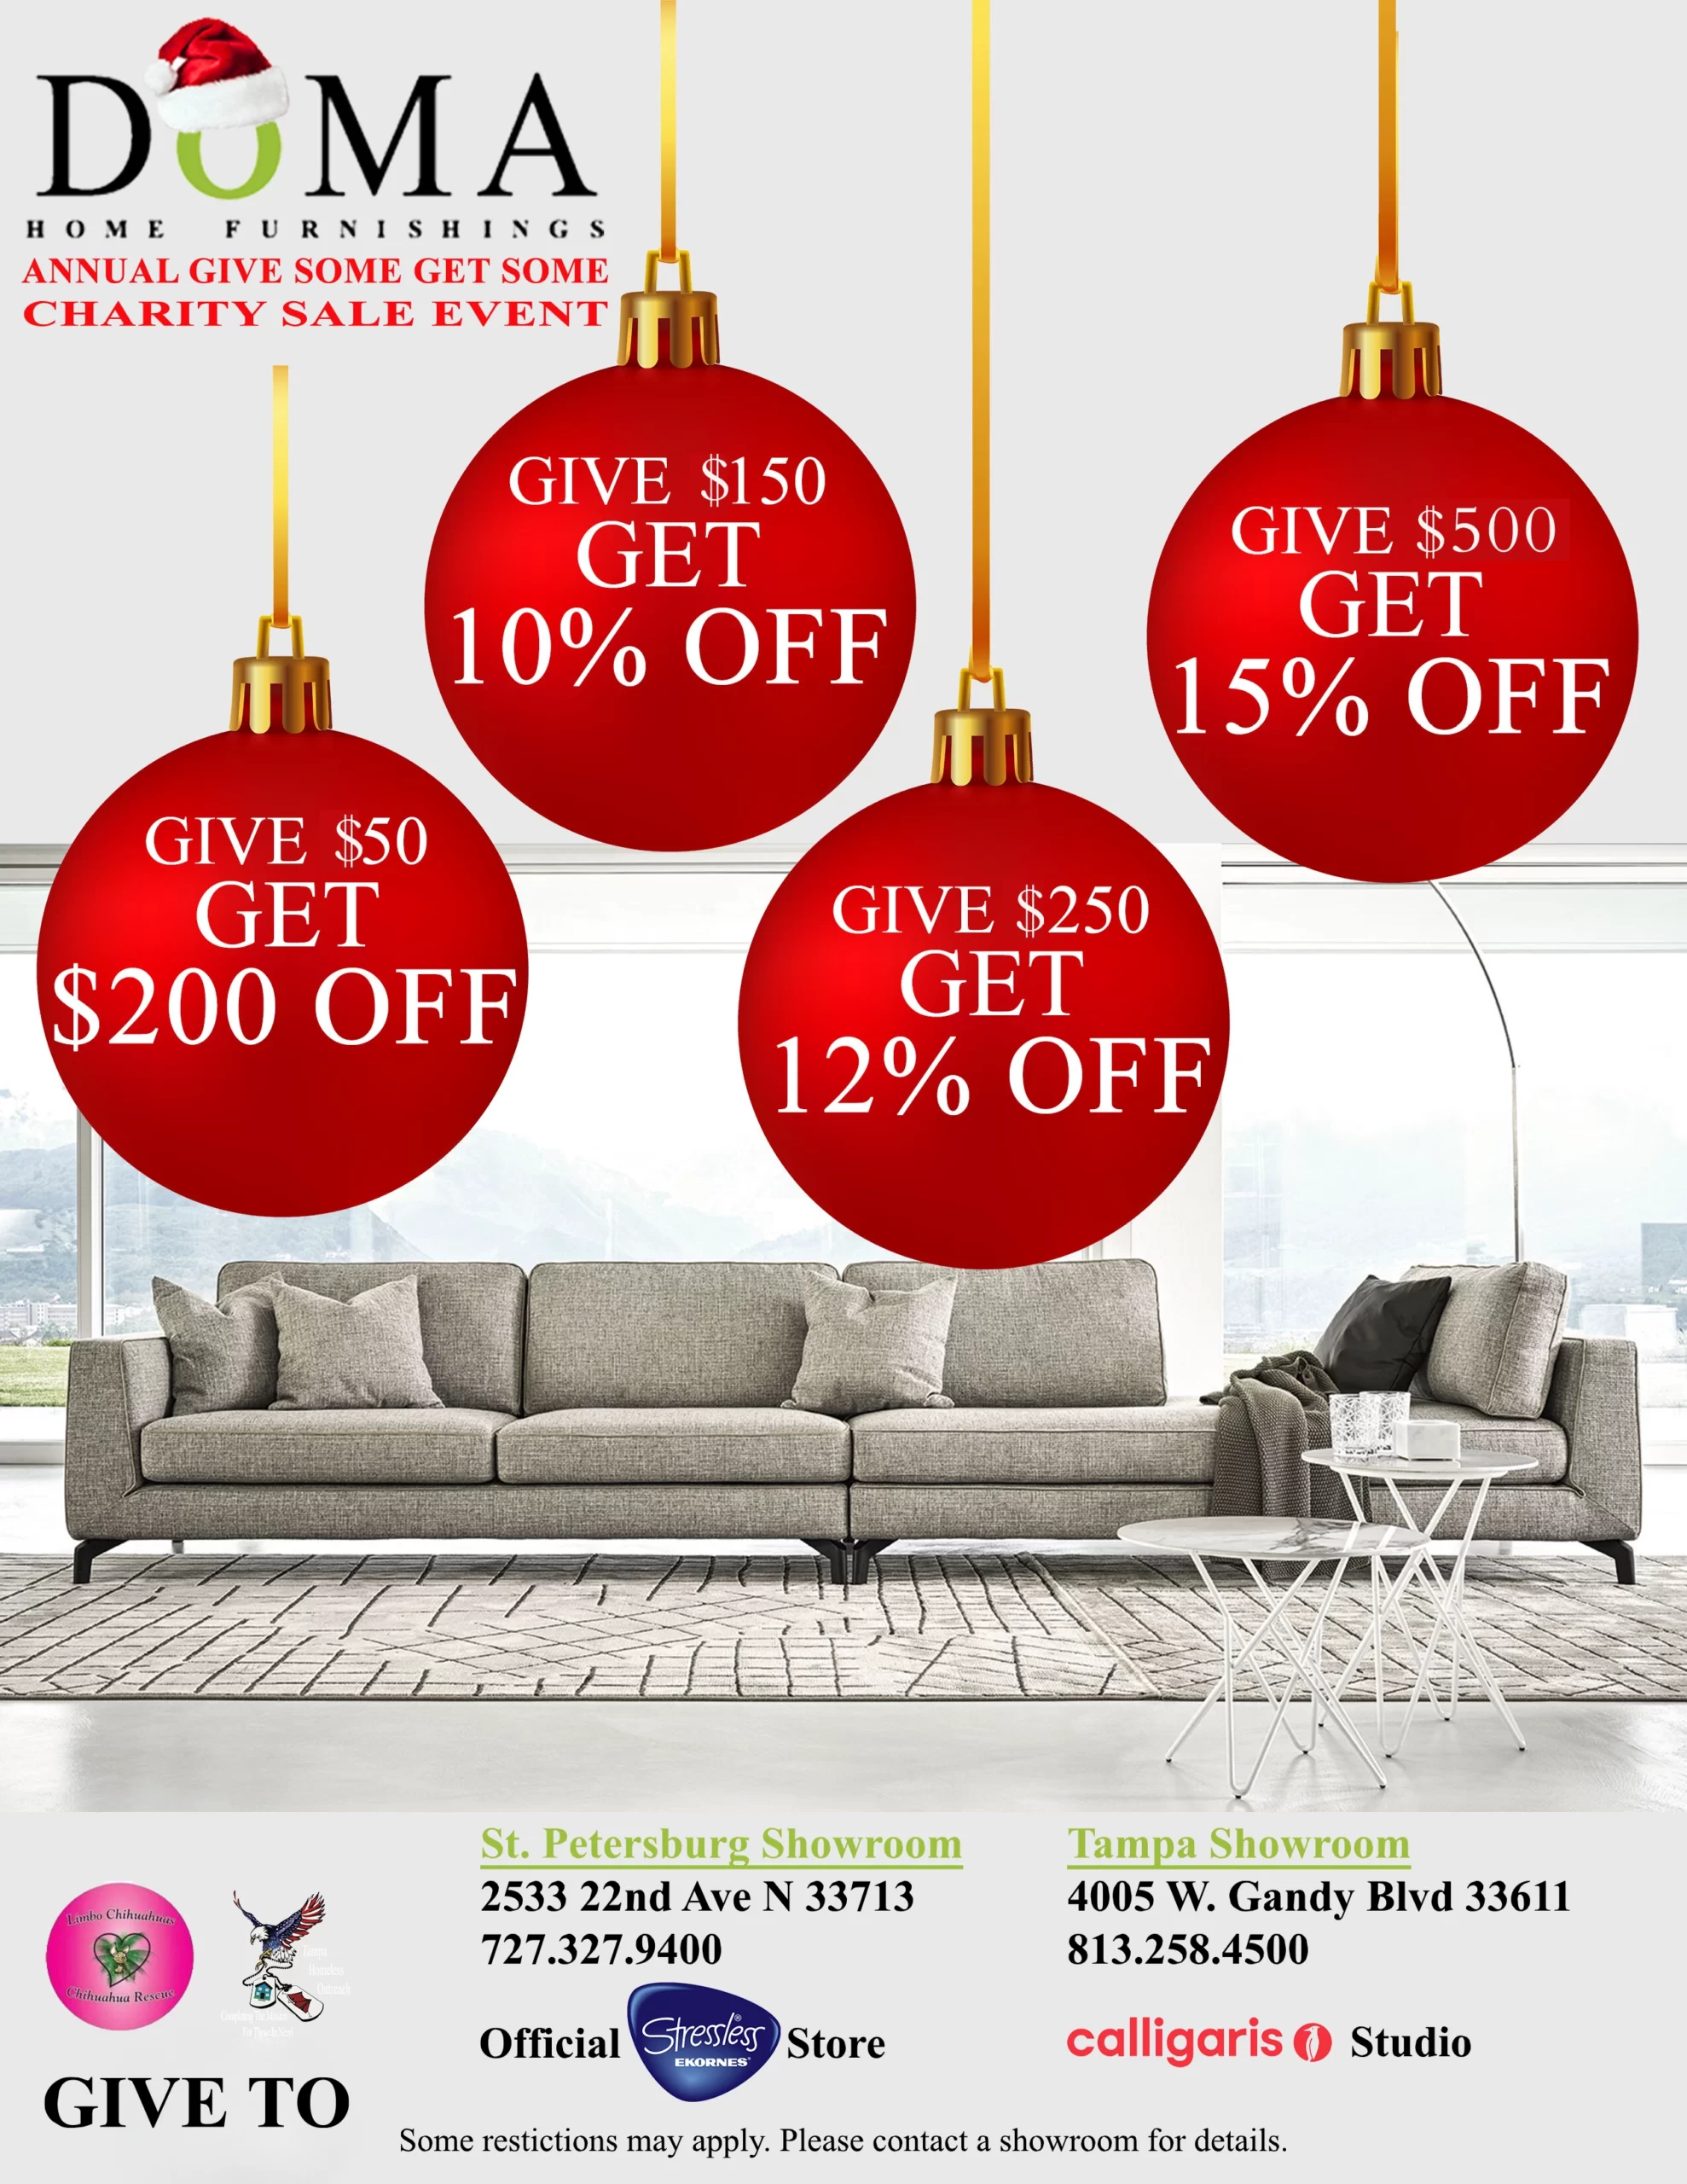 DoMA Annual Give Some Get Some Holiday Charity Sale